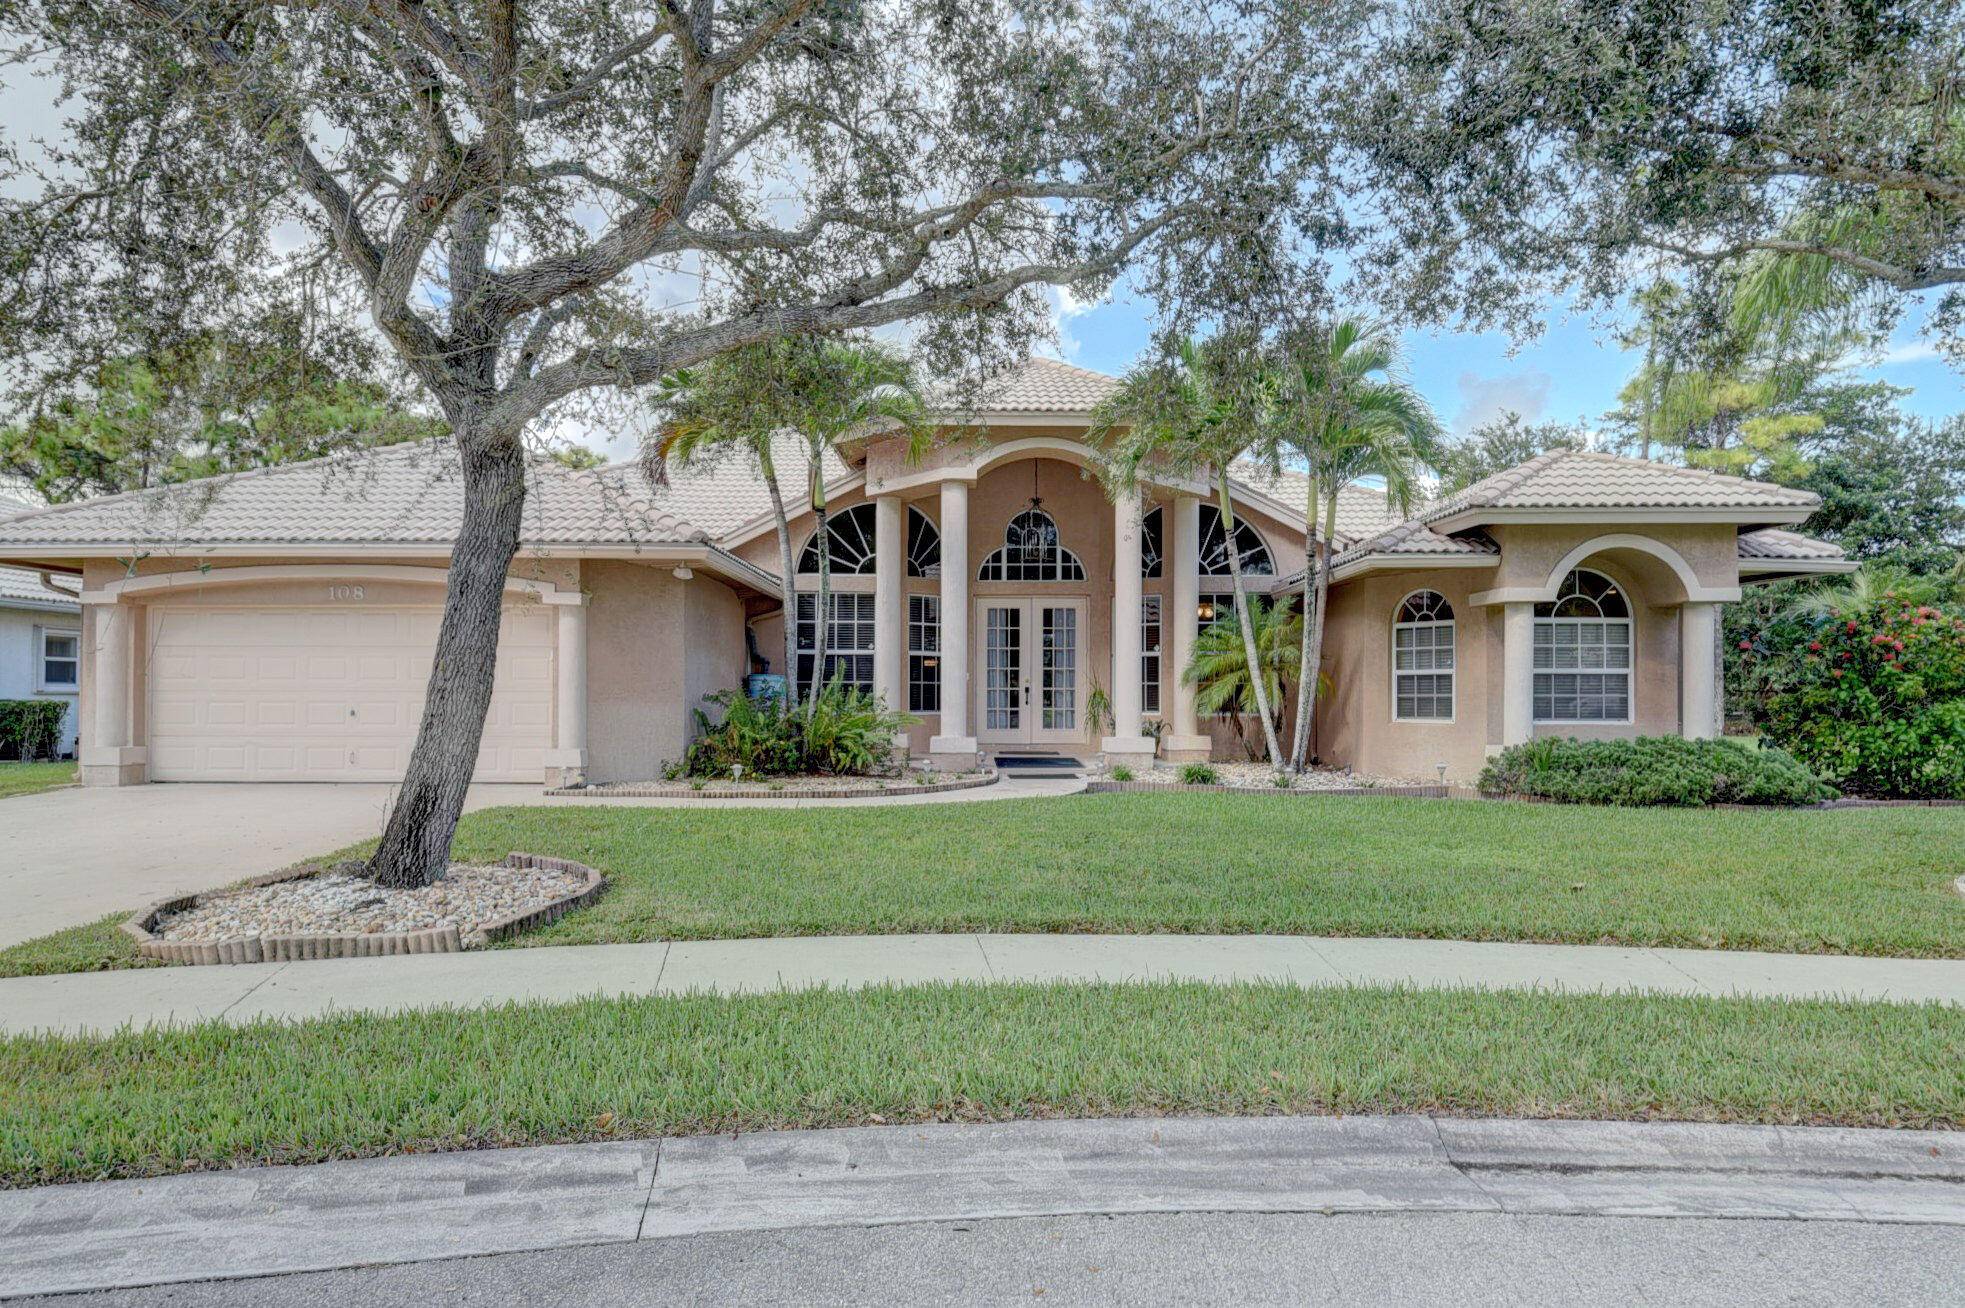 Located in the desirable neighborhood of Royal Palm Beach Estates.